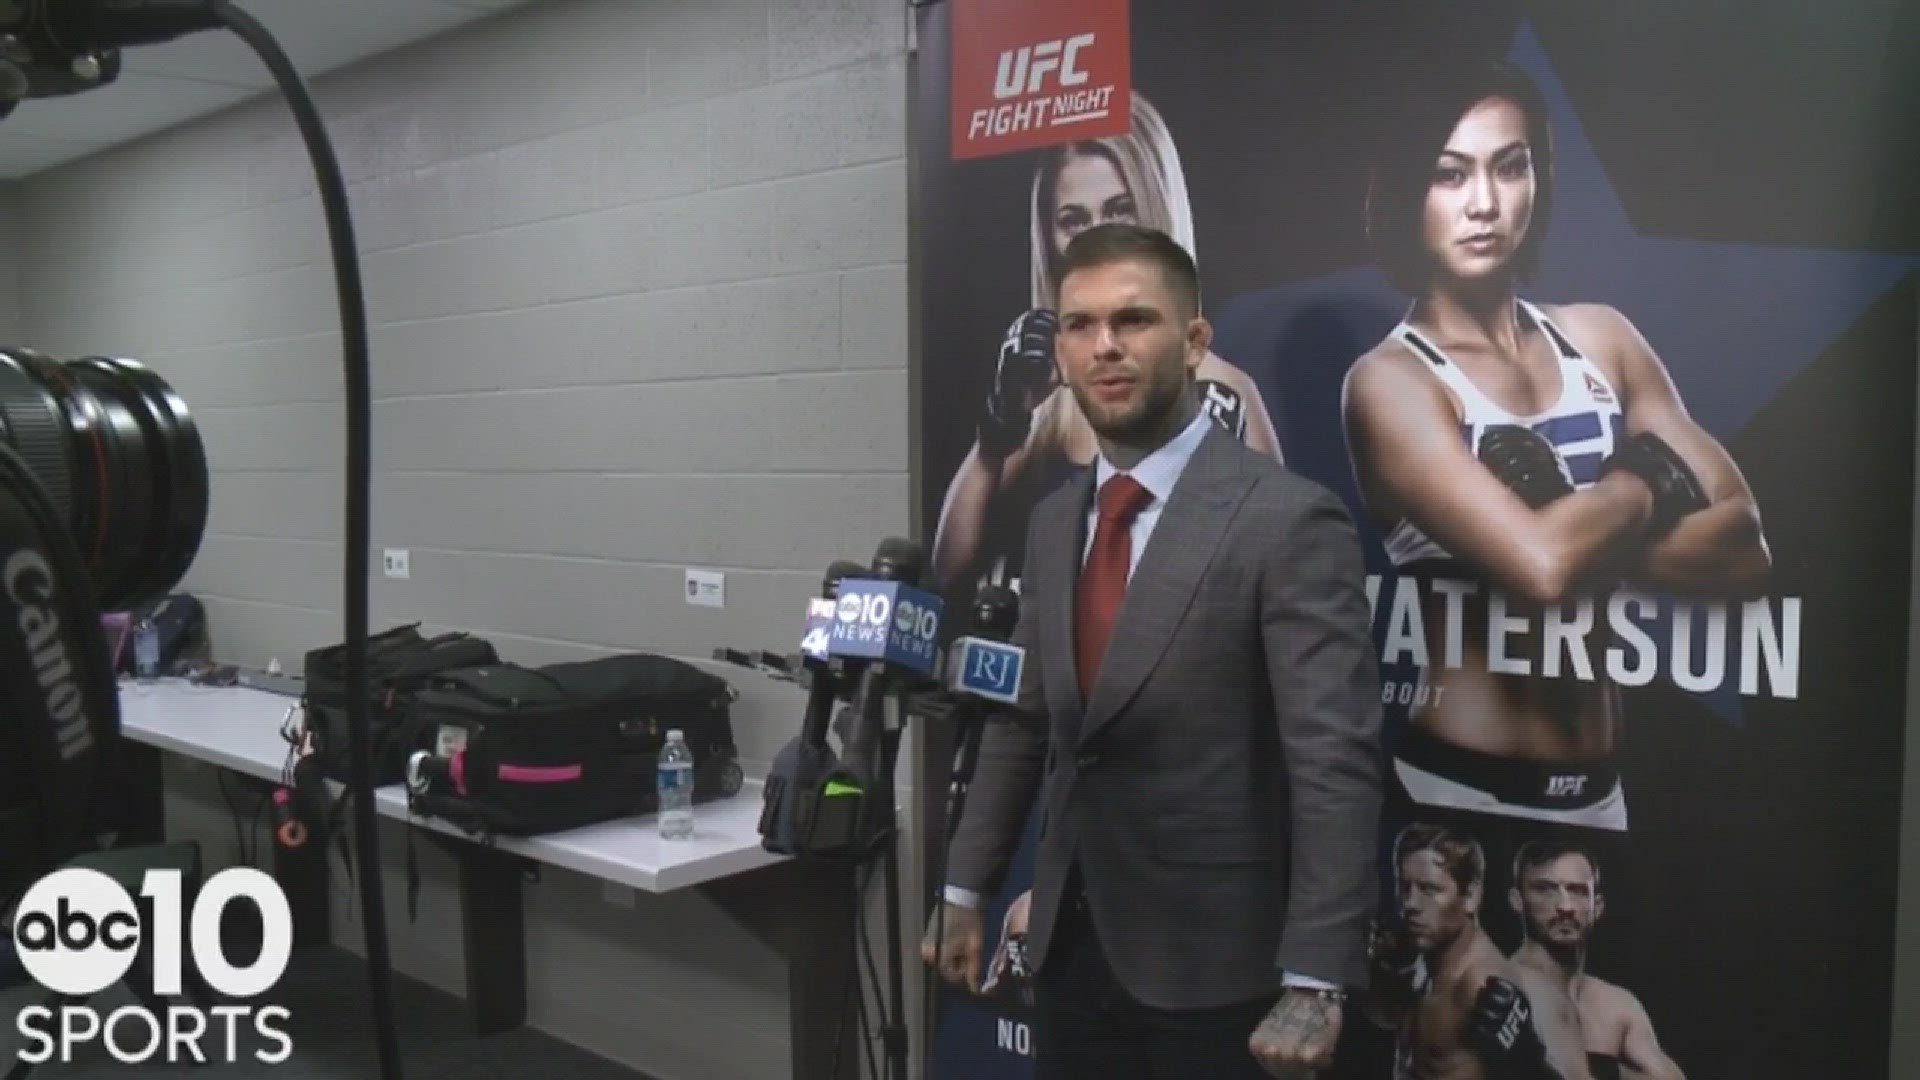 Cody Garbrandt, the Sacramento based Team Alpha Male teammate of Urijah Faber and Paige VanZant , talks about Faber's legacy, VanZant's first headlining fight and his upcoming title fight vs. a "fake" Dominick Cruz, in UFC 207.